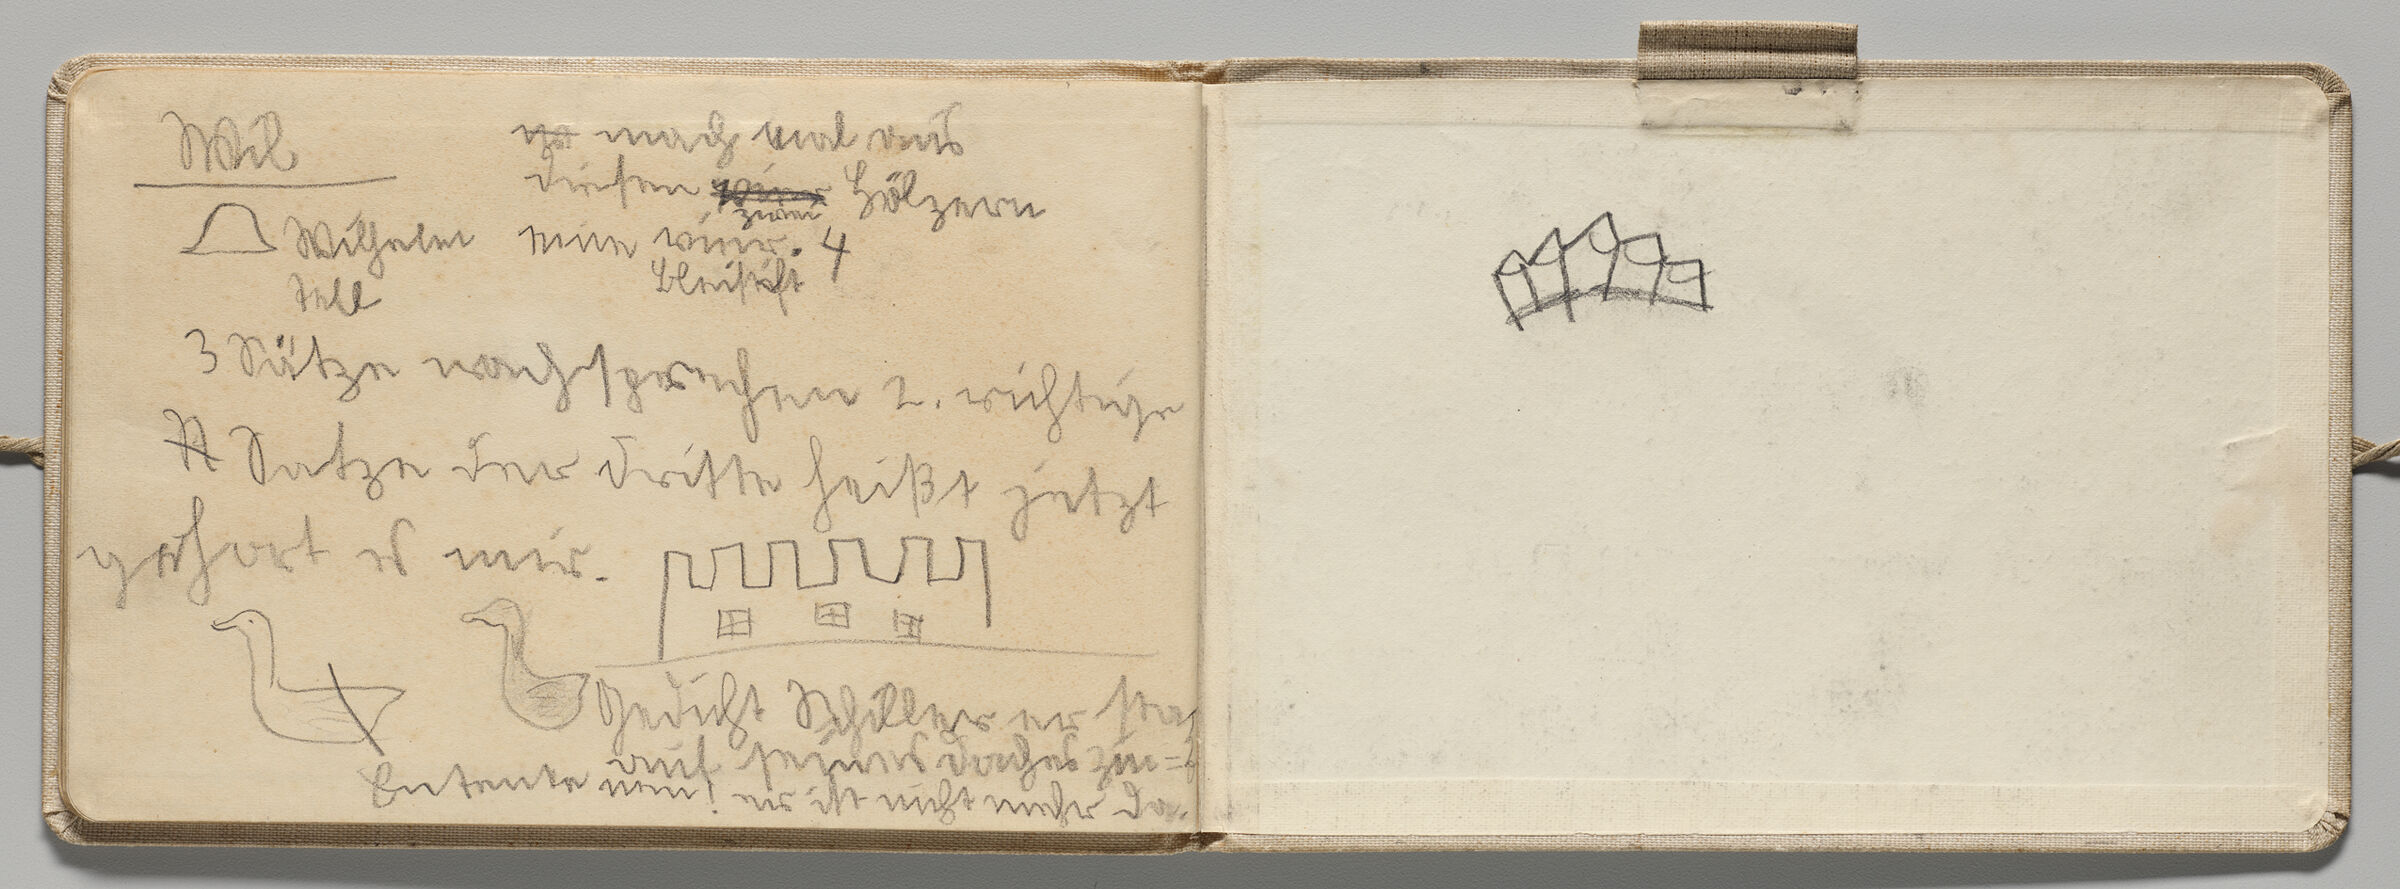 Untitled (Notes With Ducks And Architectural Sketch, Left Page); Untitled (Small Doodle, Right Page)